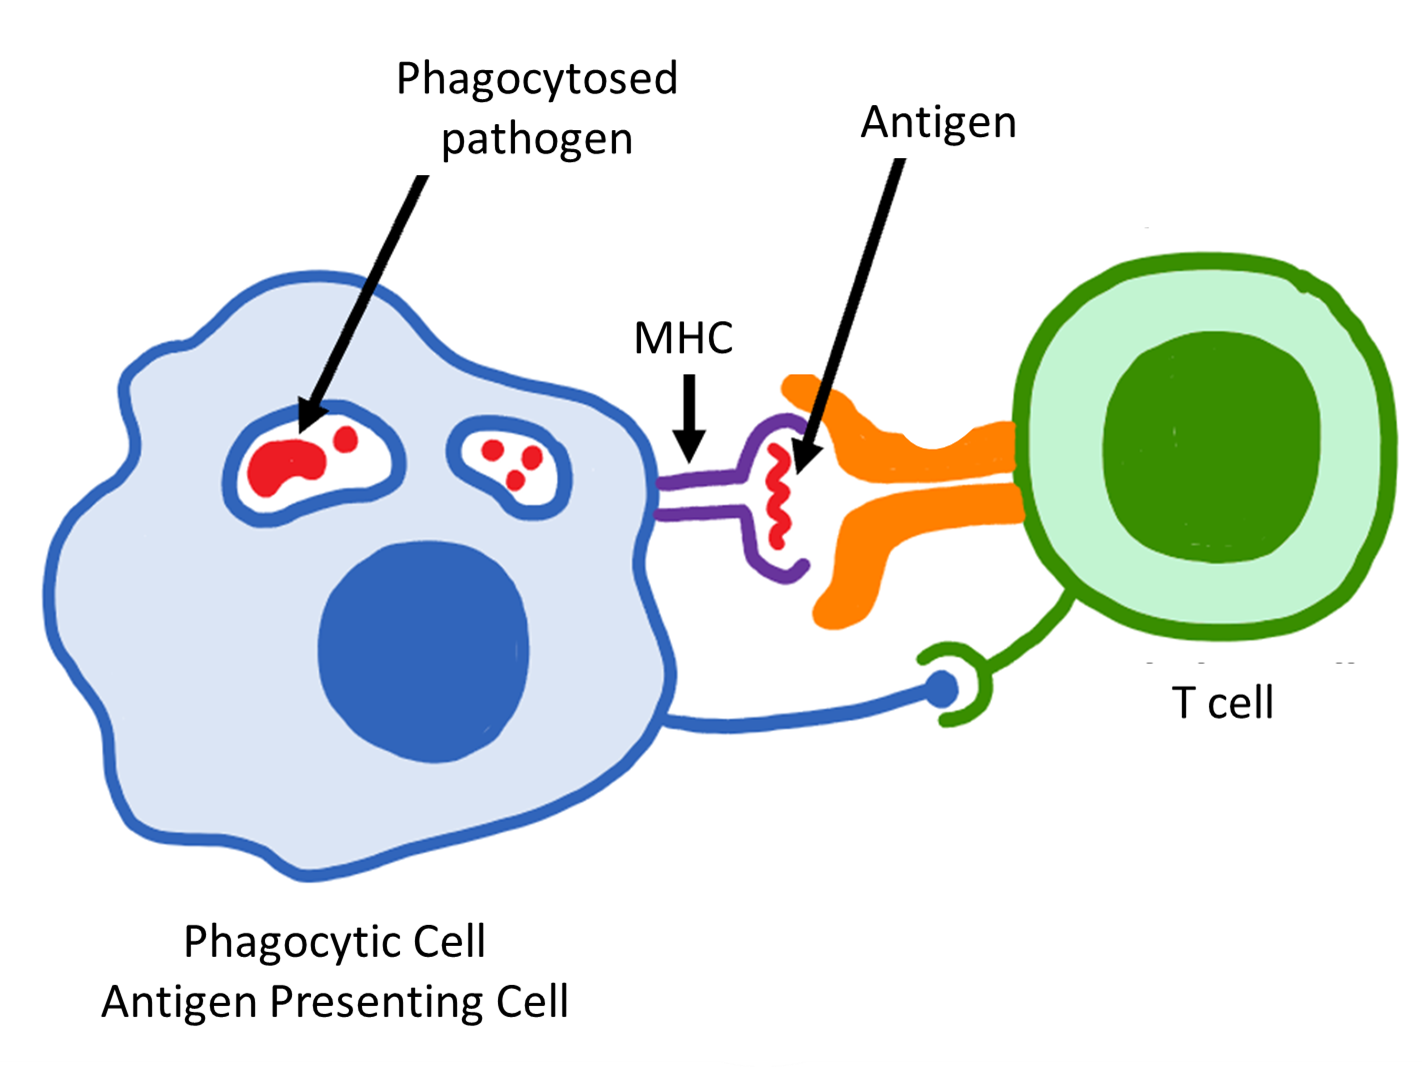 image of an antigen presenting cell and a T cell